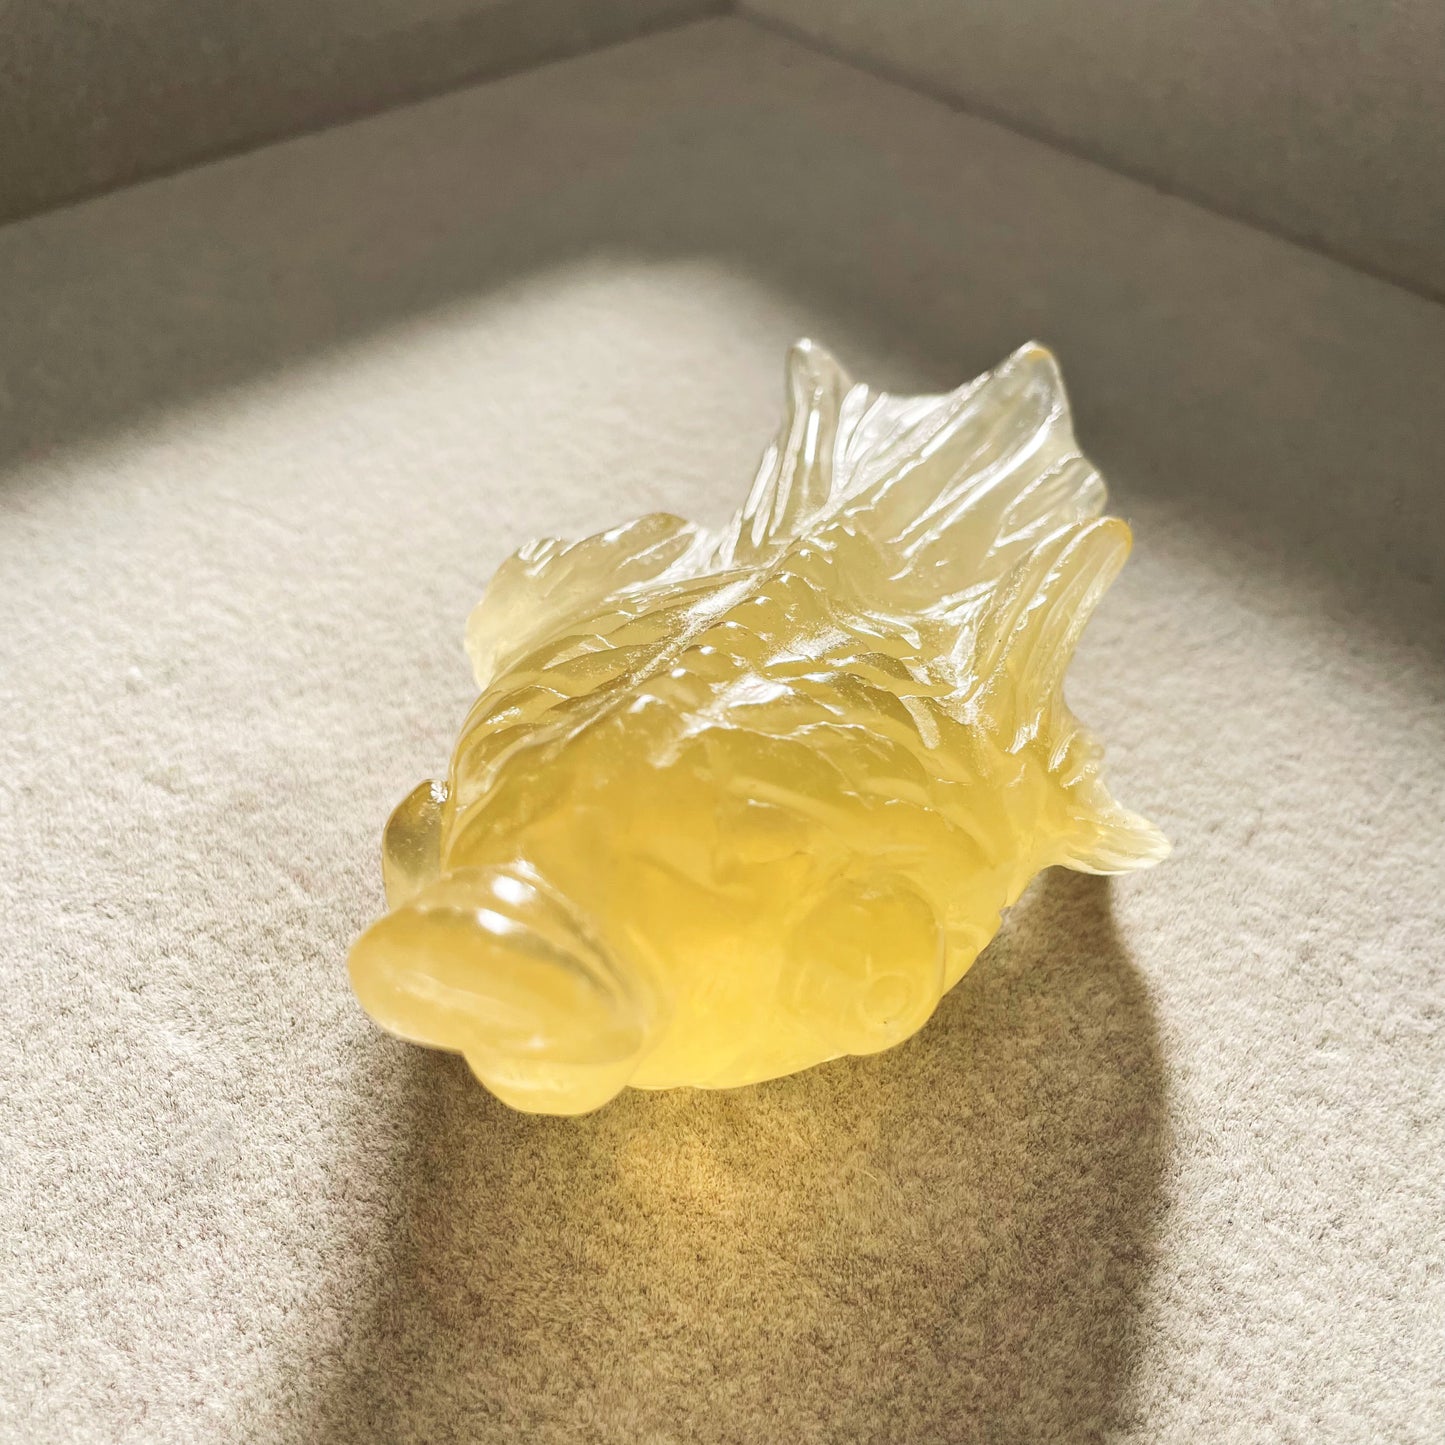 Exclusive Rare Find: Citrine Crystal Koi Fish Carving ($100 Last One)